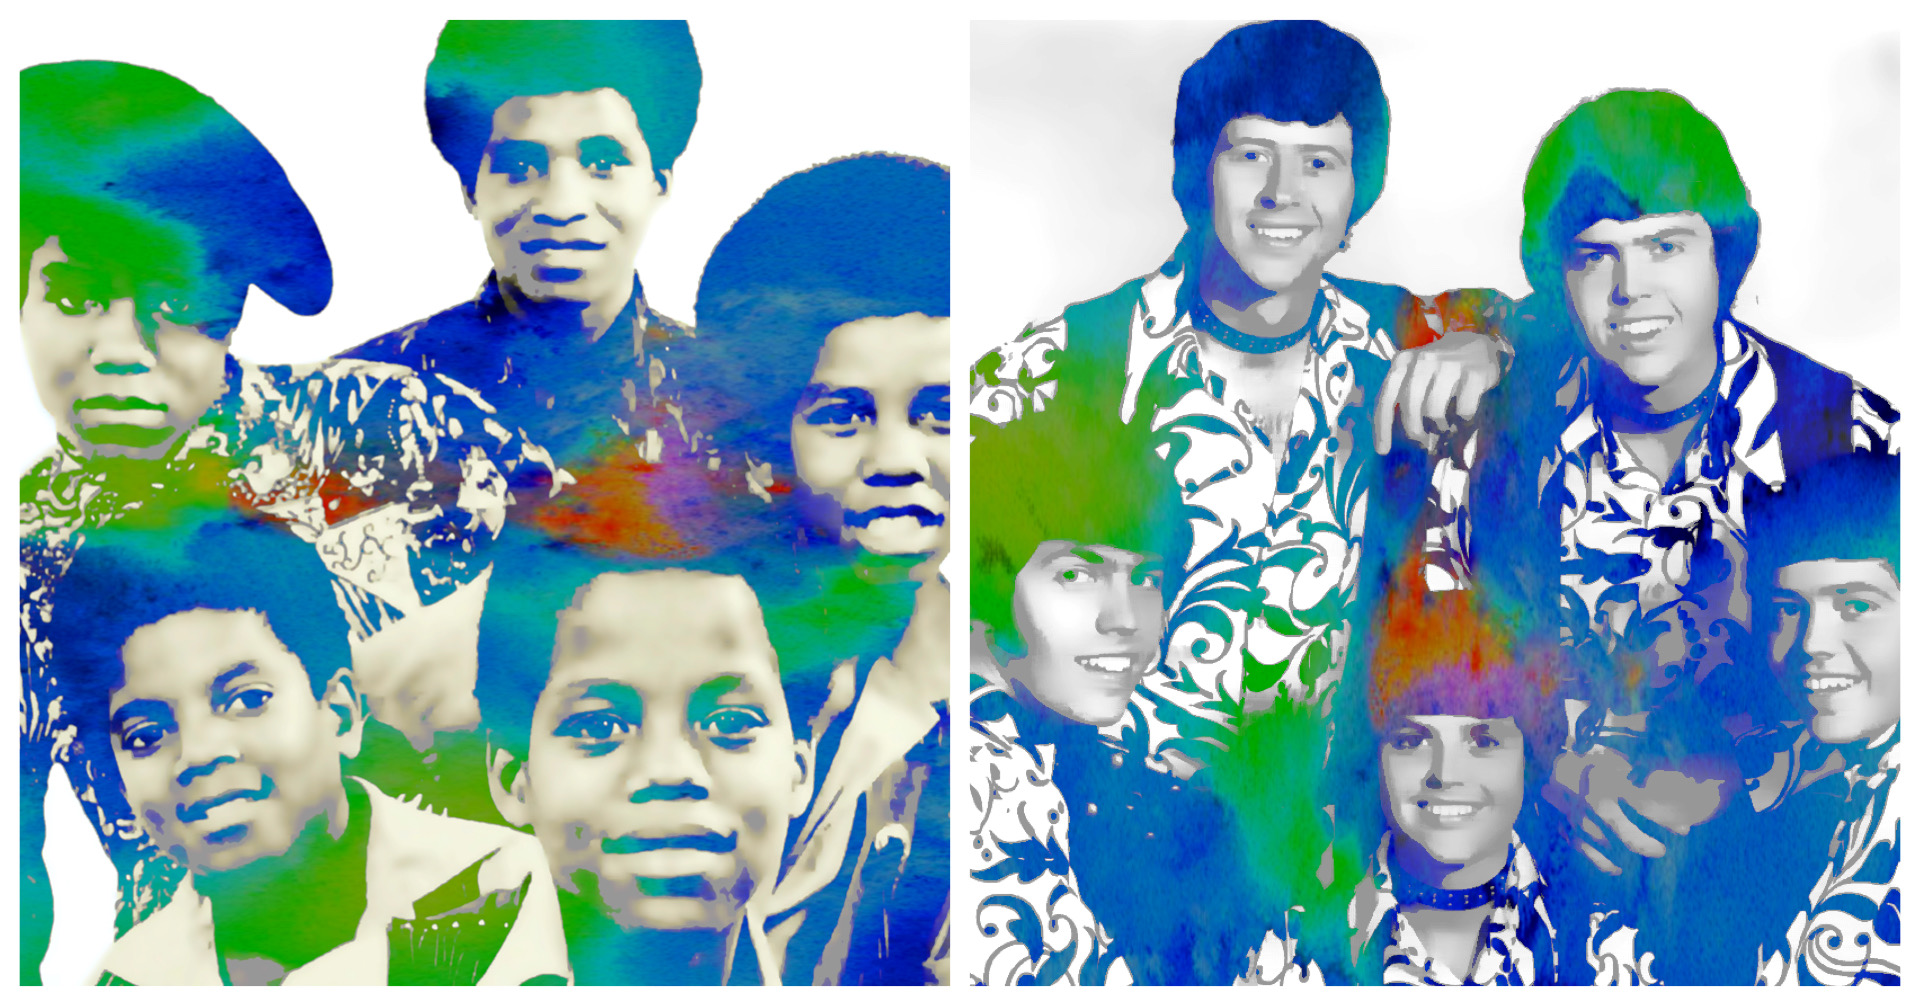 The case of the Jacksons vs the Osmonds (sans their lead singers)…a  friendly debate